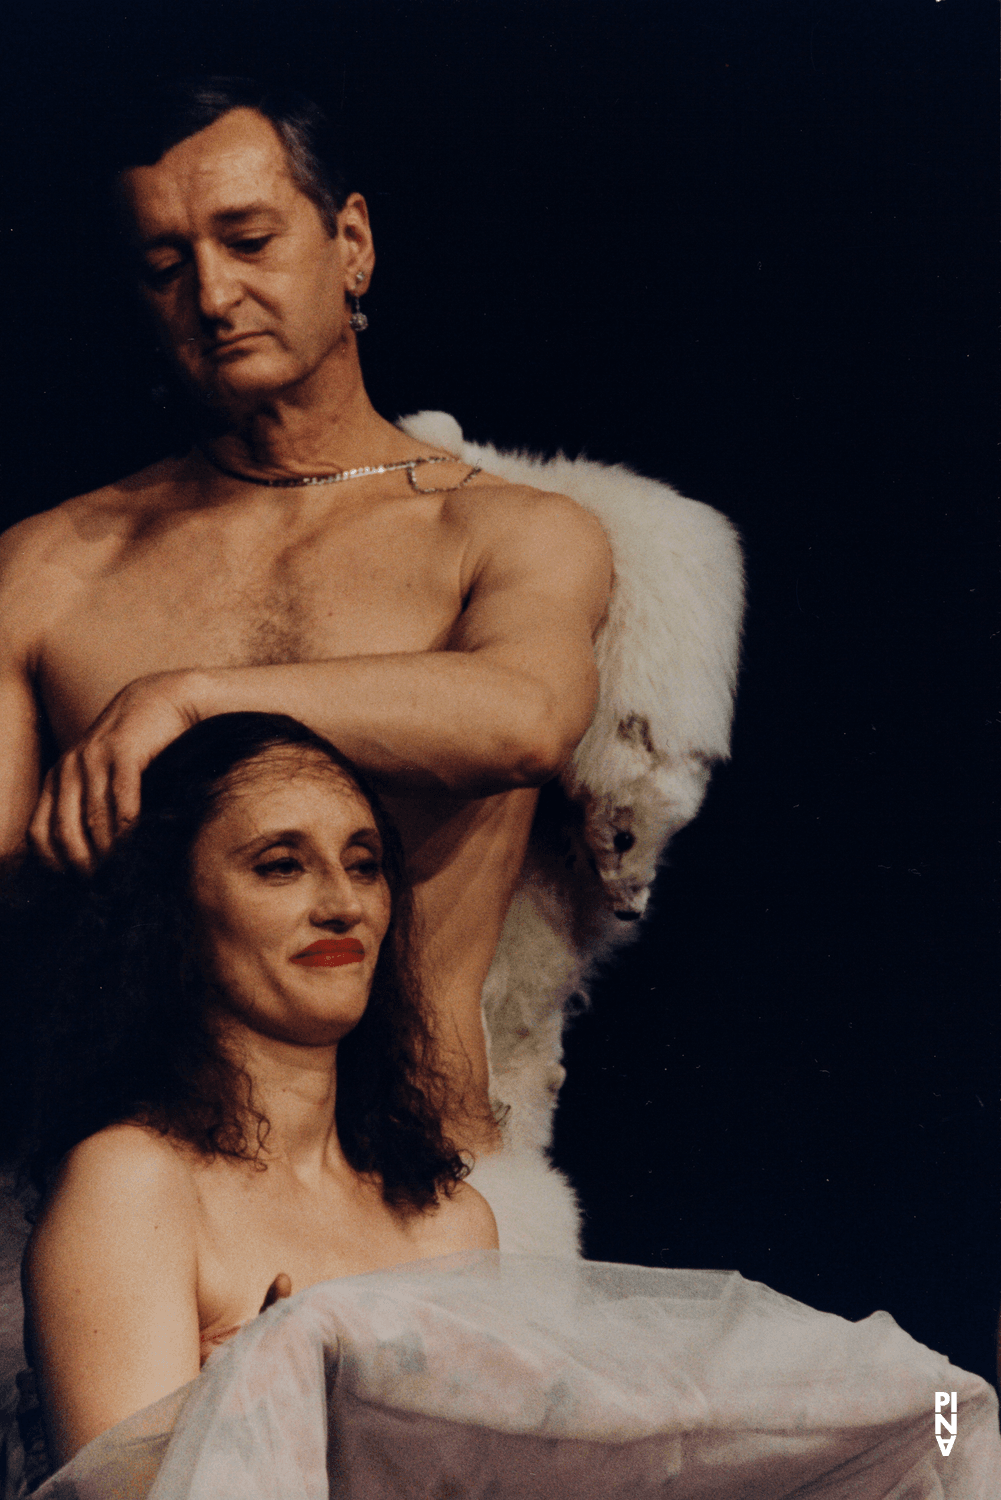 Jan Minařík and Nazareth Panadero in “Nur Du (Only You)” by Pina Bausch, May 11, 1996